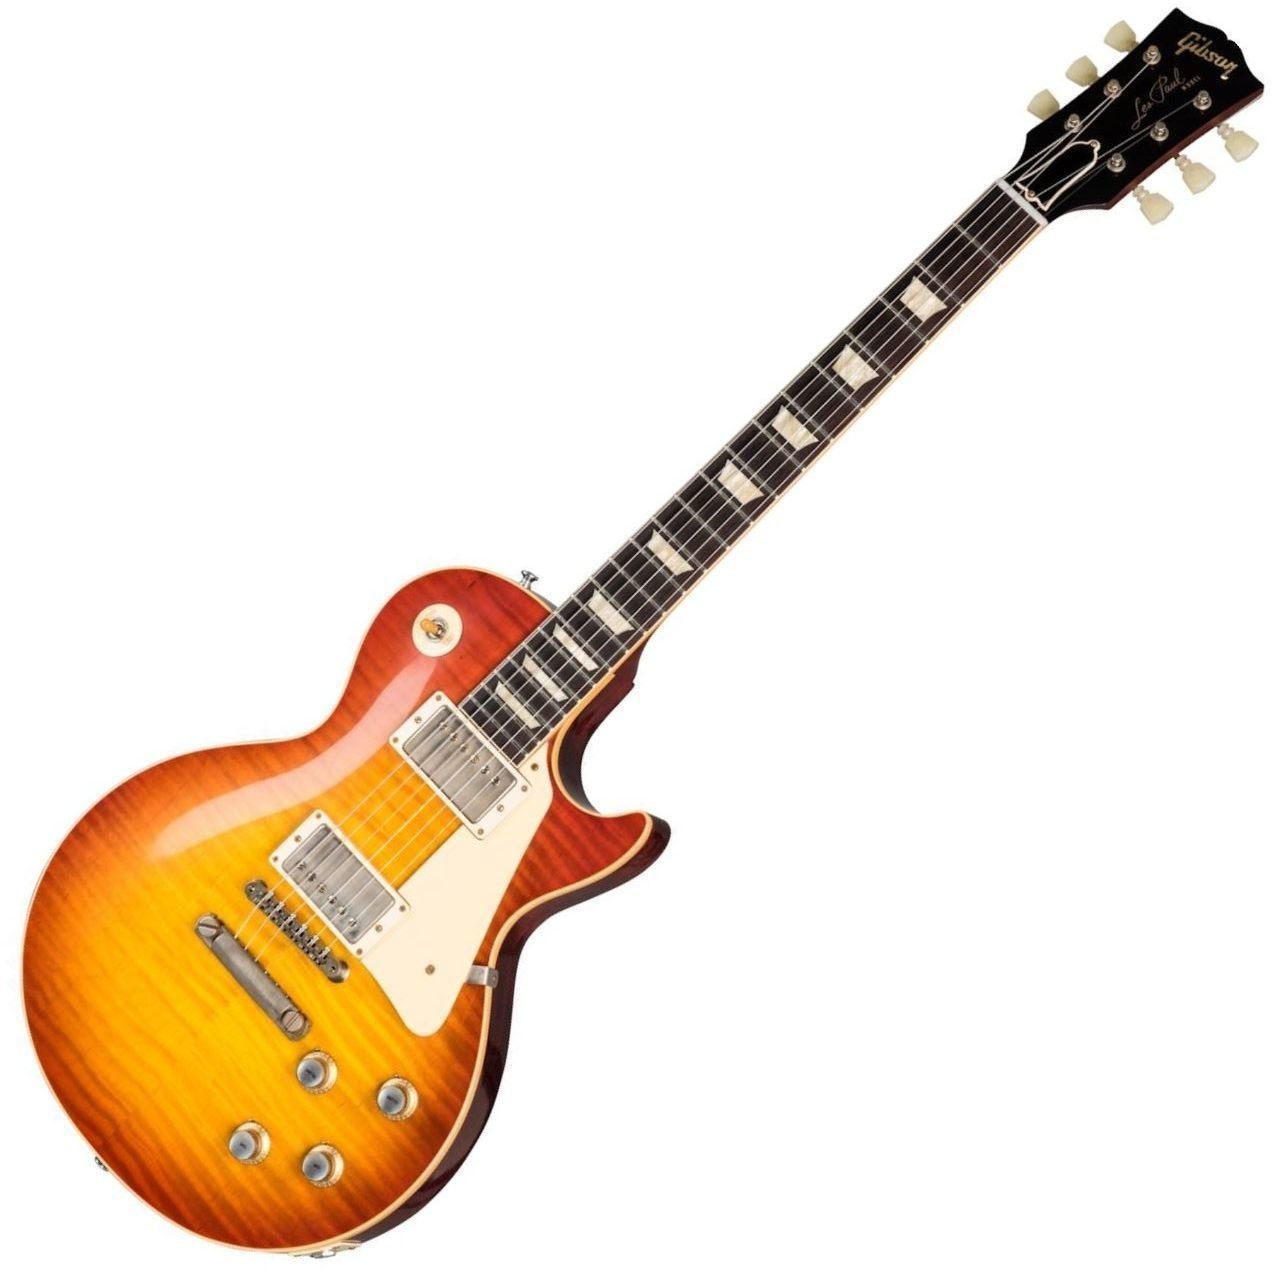 Electric guitar Gibson 1960 Les Paul Standard Reissue VOS Washed Cherry Sunburst